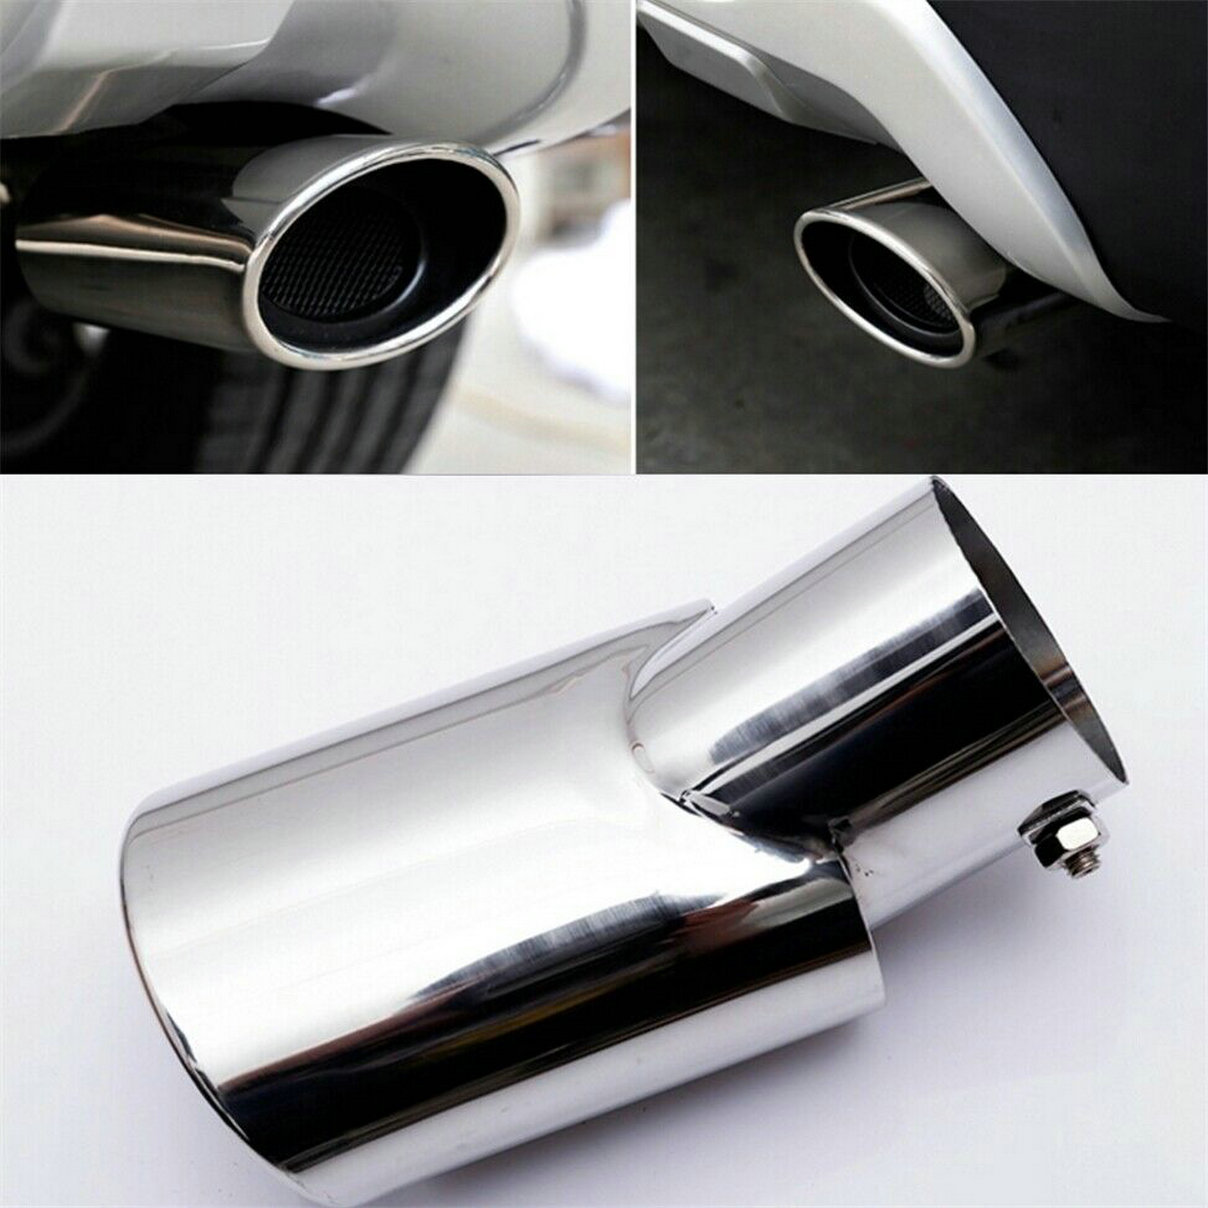 Stainless Rear Exhaust Muffler Tip End Pipe Trim For Toyota Highlander 2015-2019